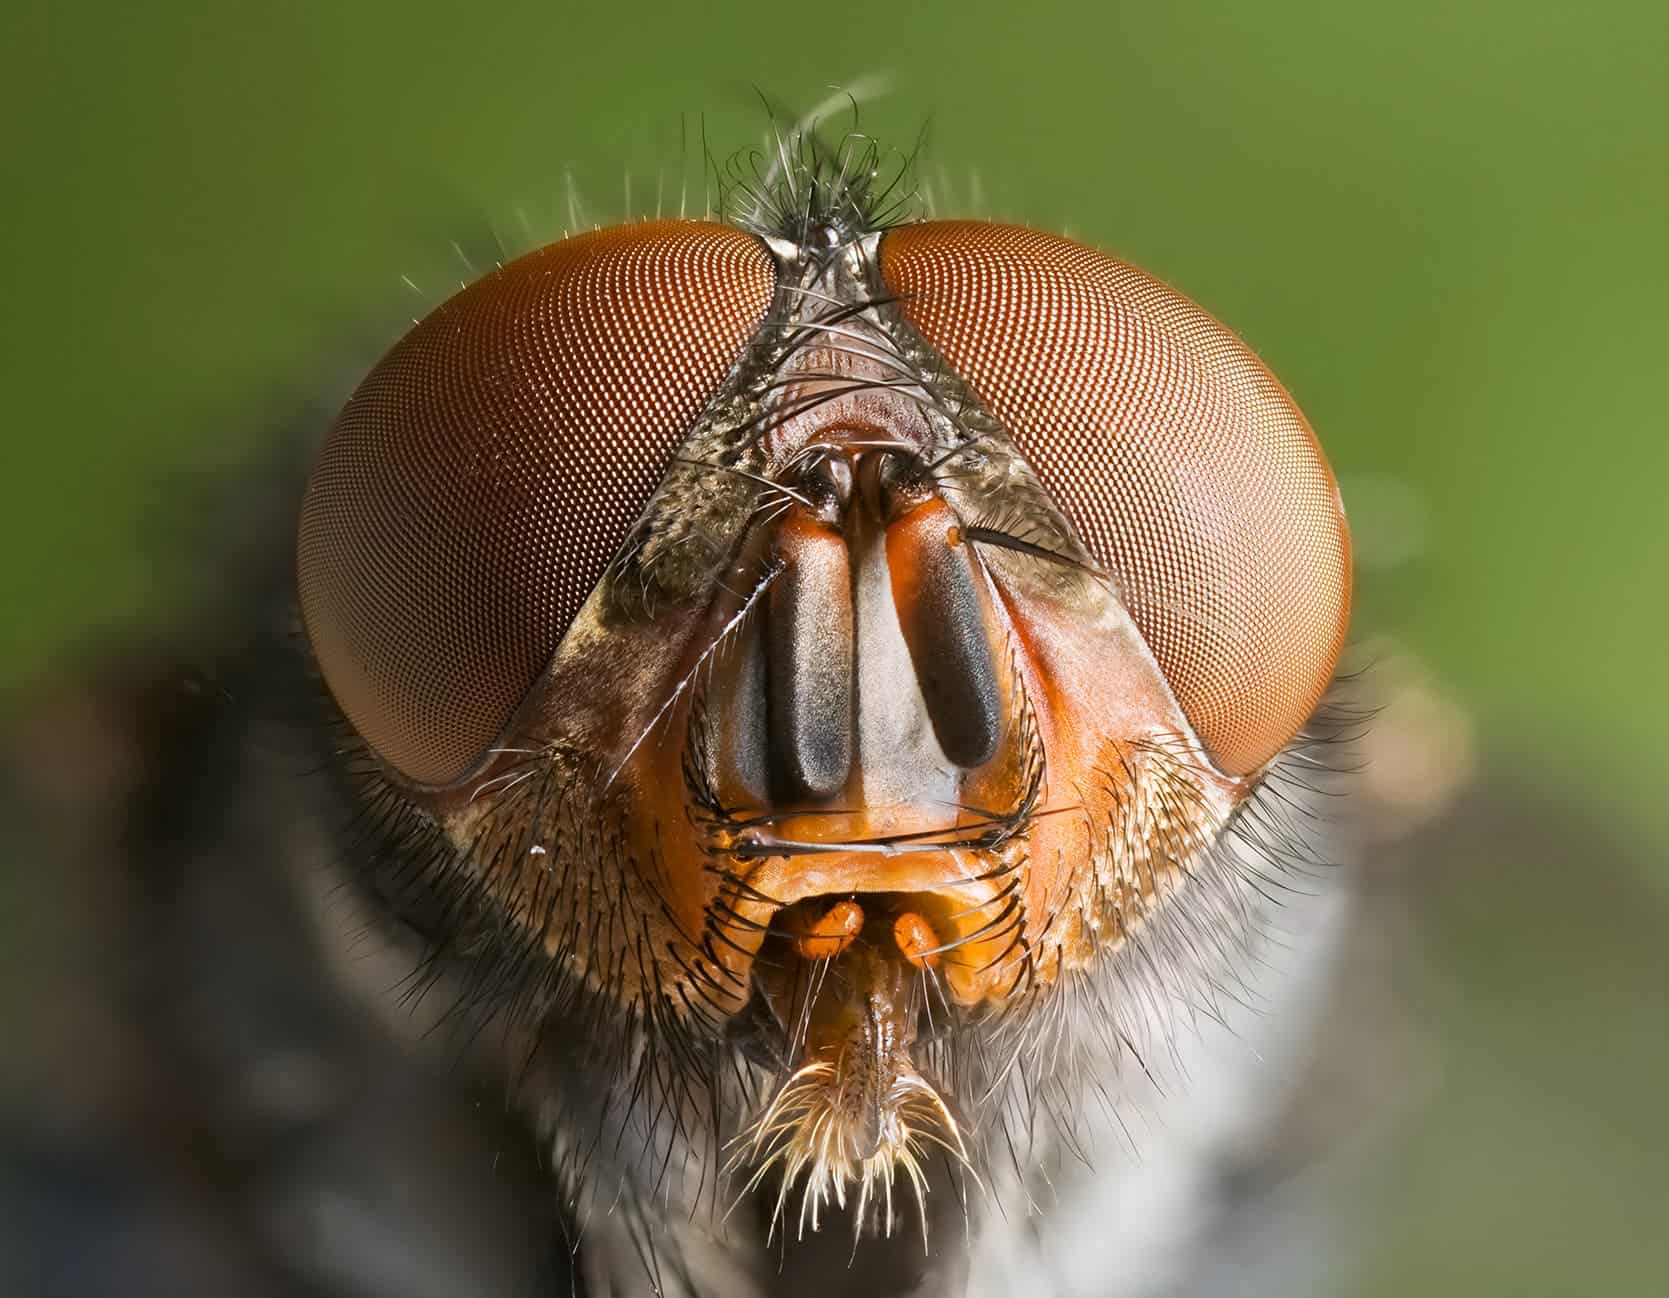 Arthropods such as this Calliphora vomitoria fly have compound eyes. Image credits: JJ Harrison.